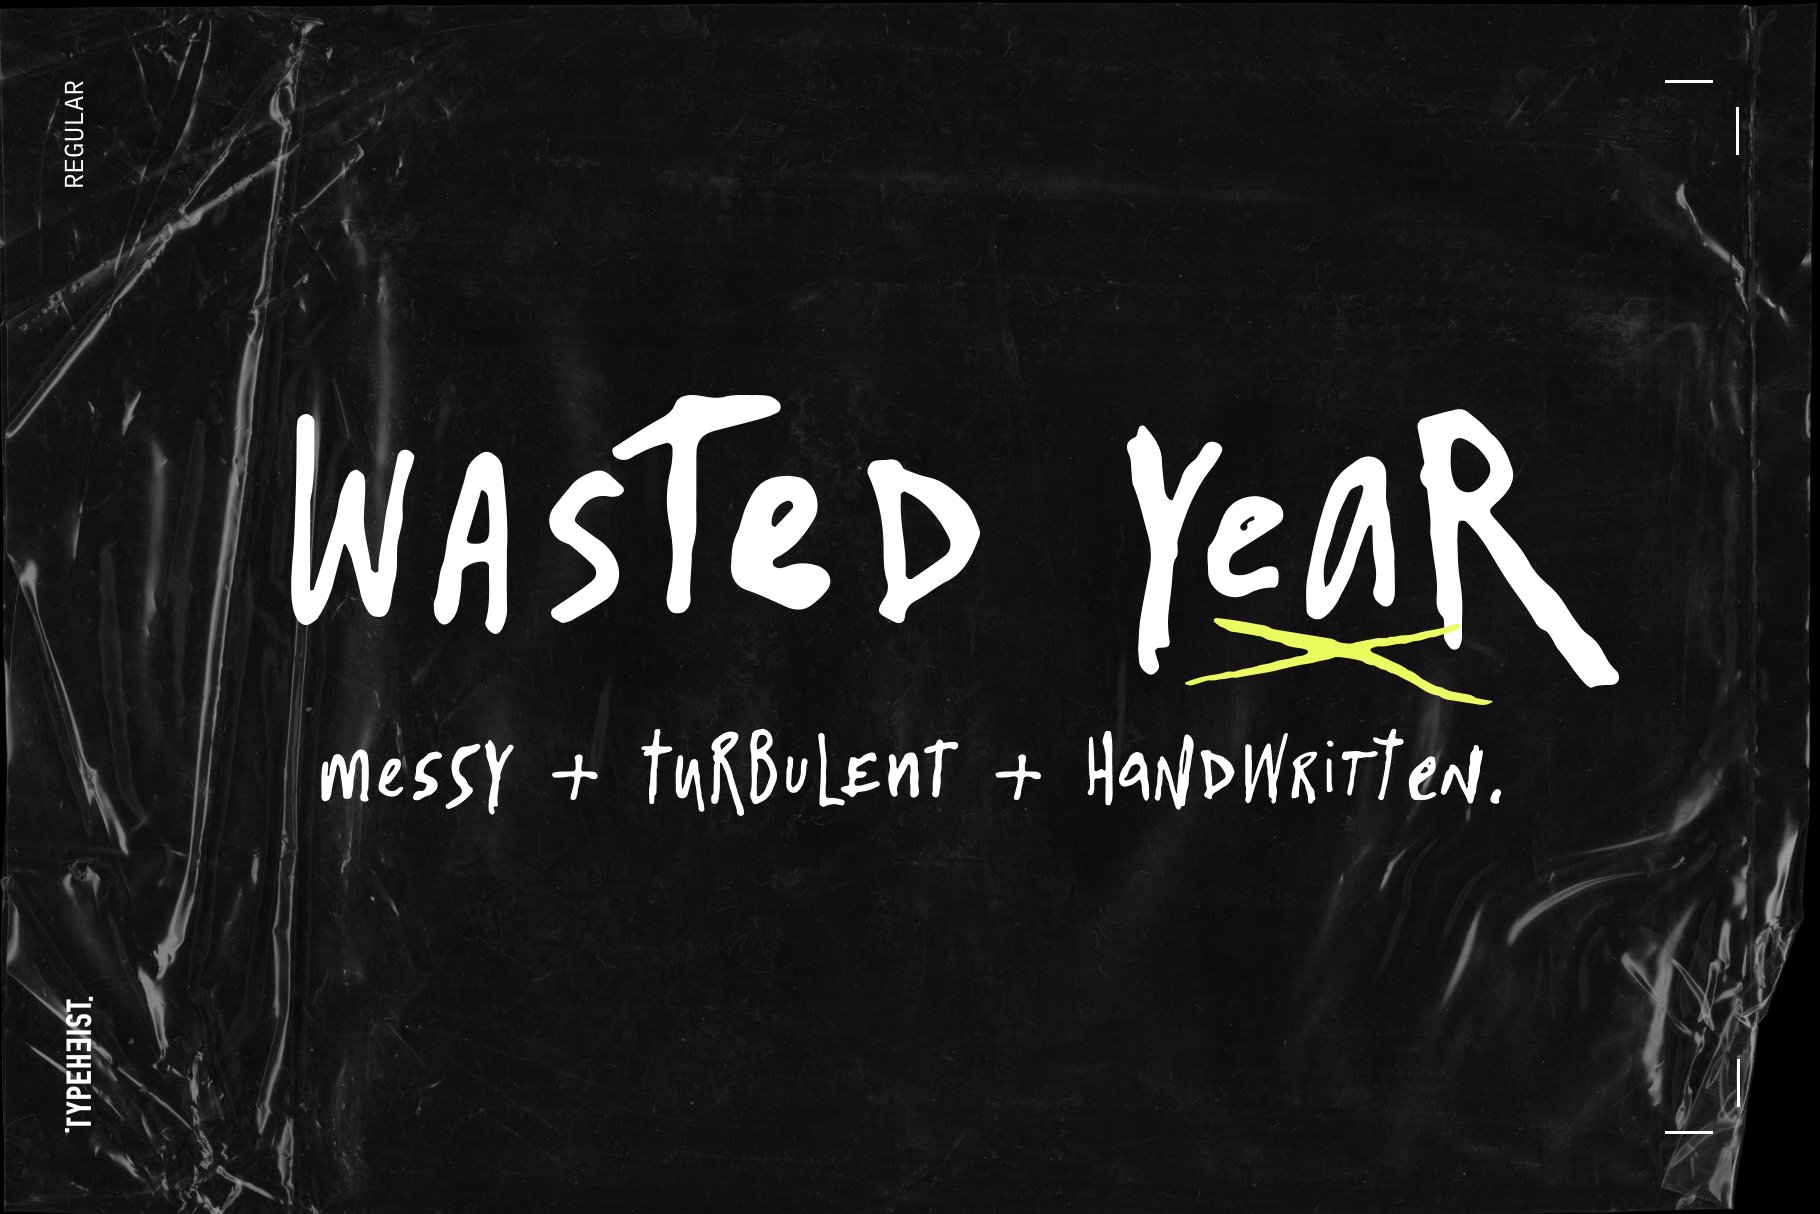 Wasted Year Messy Handwriting Font cover image.